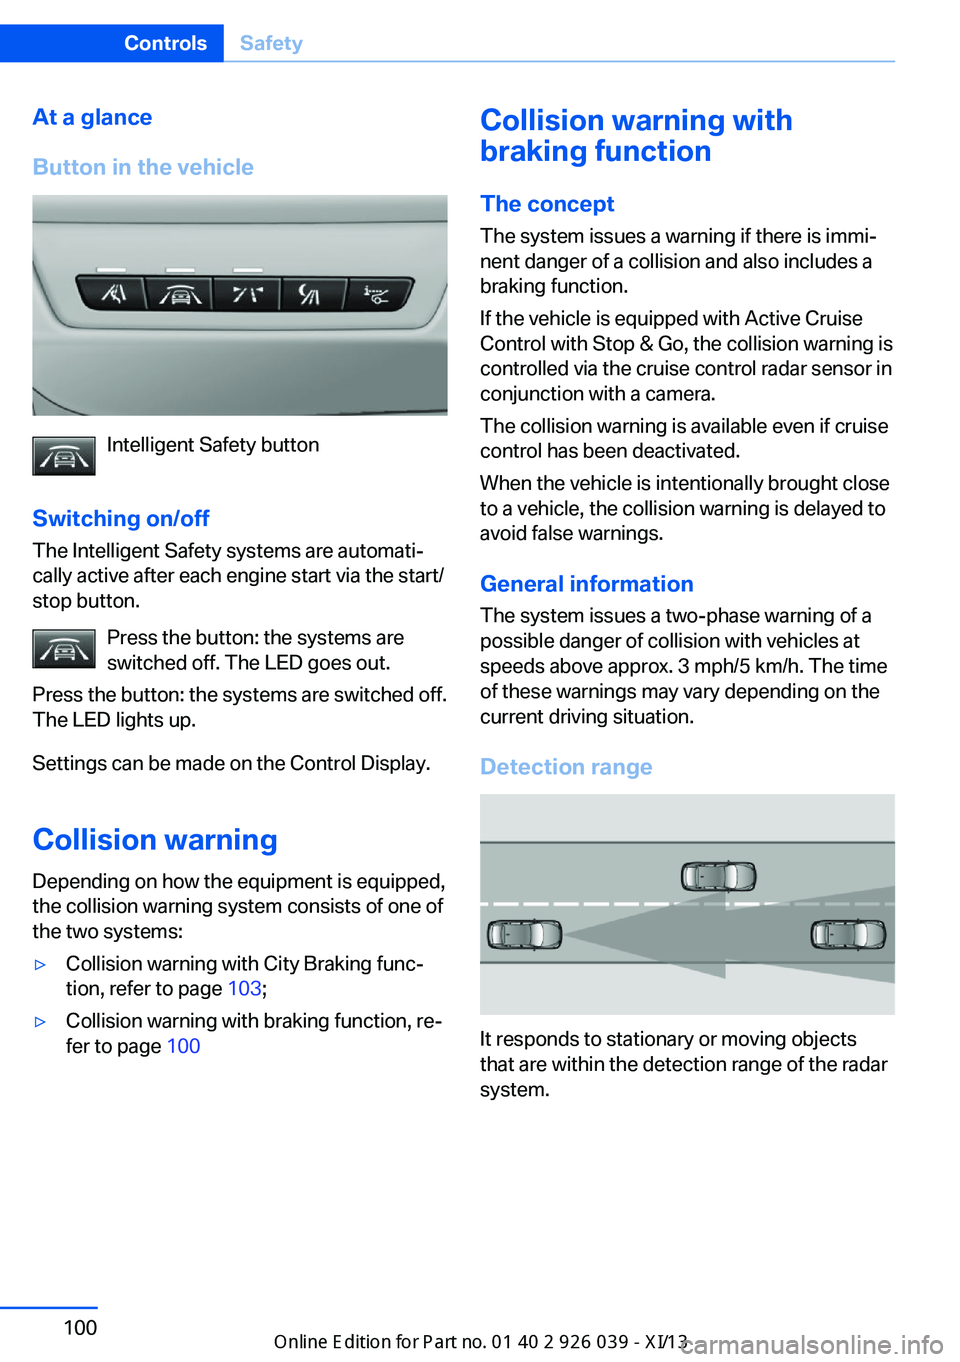 BMW 6 SERIES COUPE 2013 F13 Owners Guide At a glance
Button in the vehicle
Intelligent Safety button
Switching on/off The Intelligent Safety systems are automati‐
cally active after each engine start via the start/
stop button.
Press the b